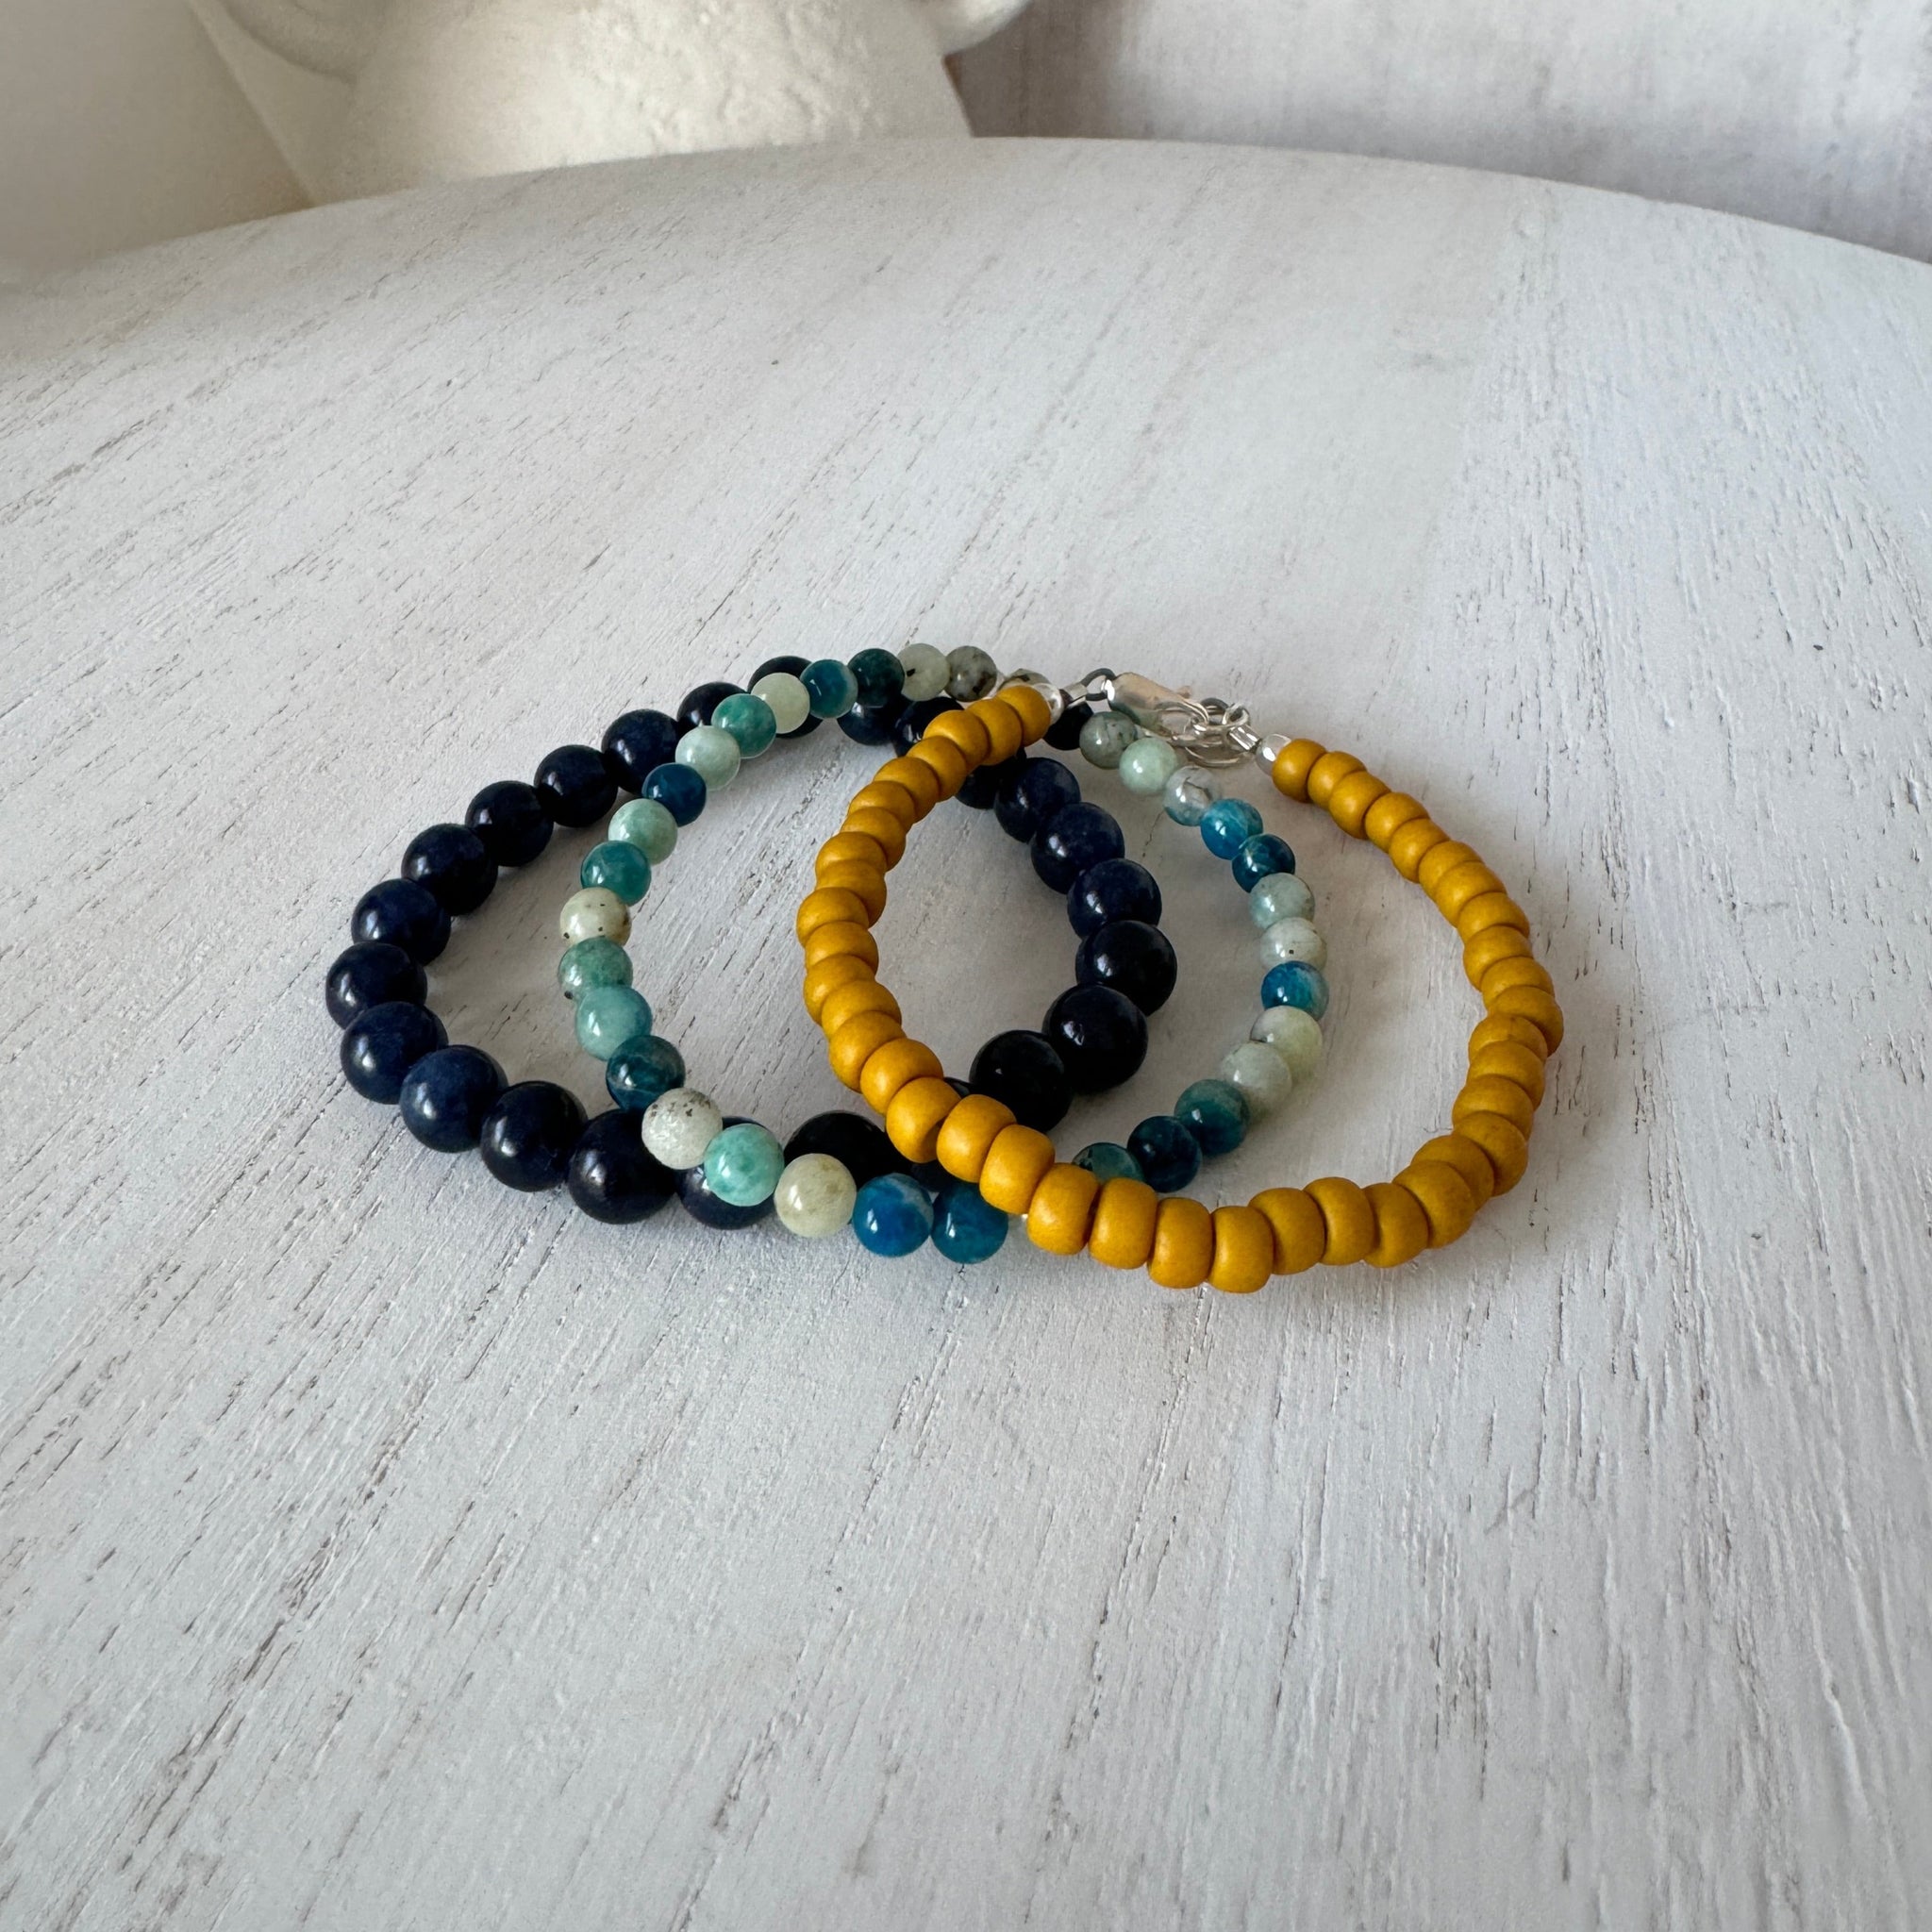 Stormy Waters and Sun Natural Stone Bead Bracelets - Set of 3 or Each